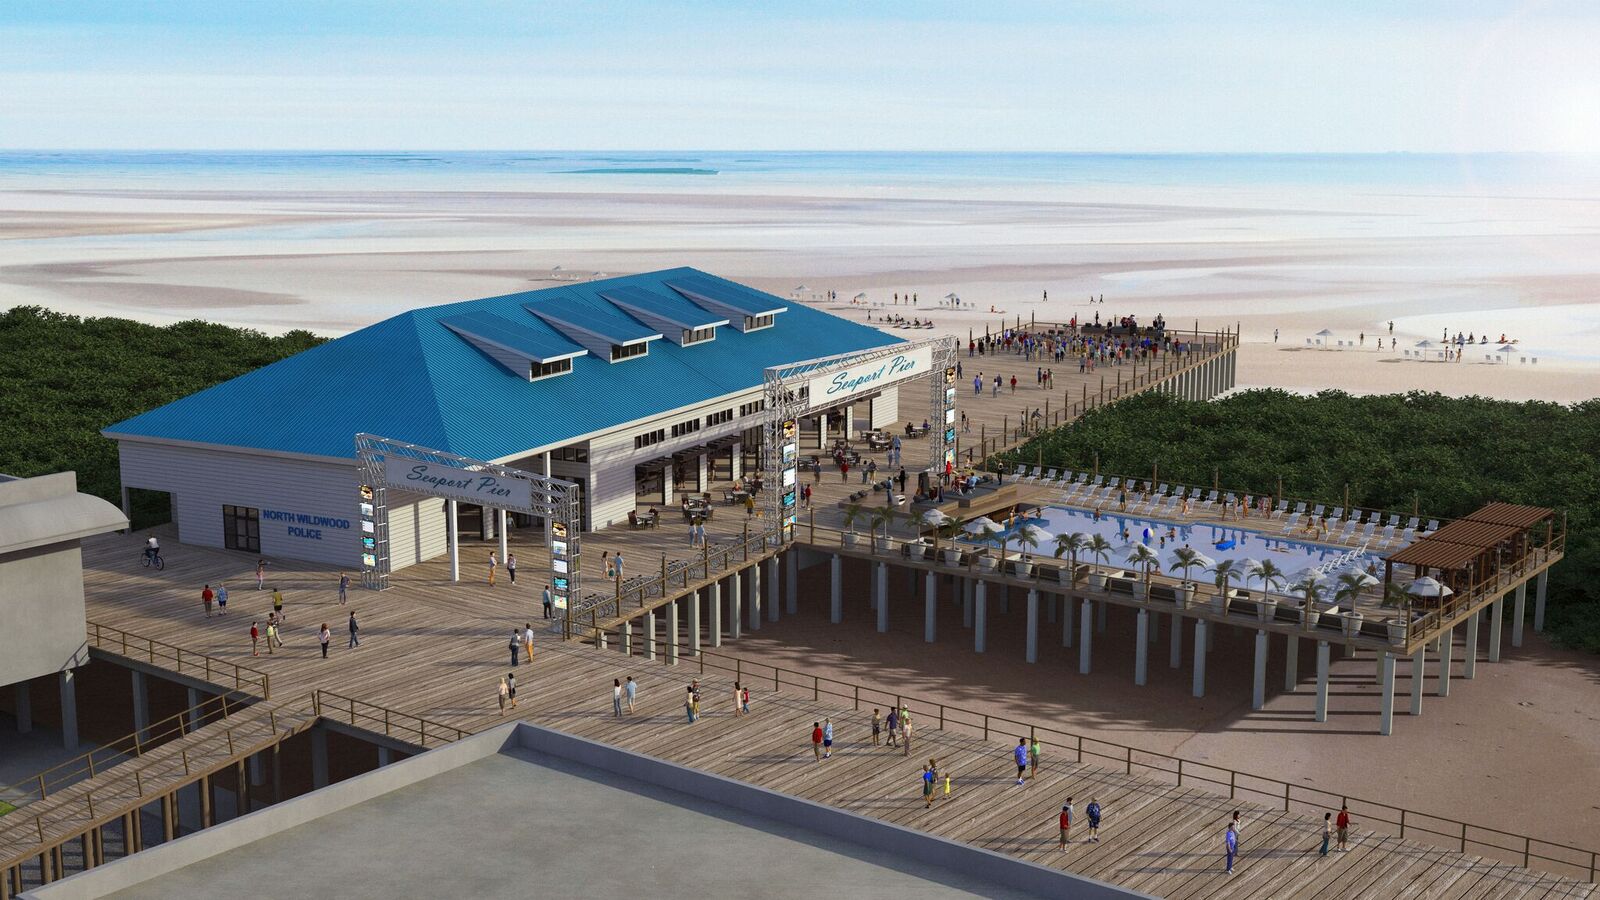 Artist's rendering shows the overall appearance of the pier.